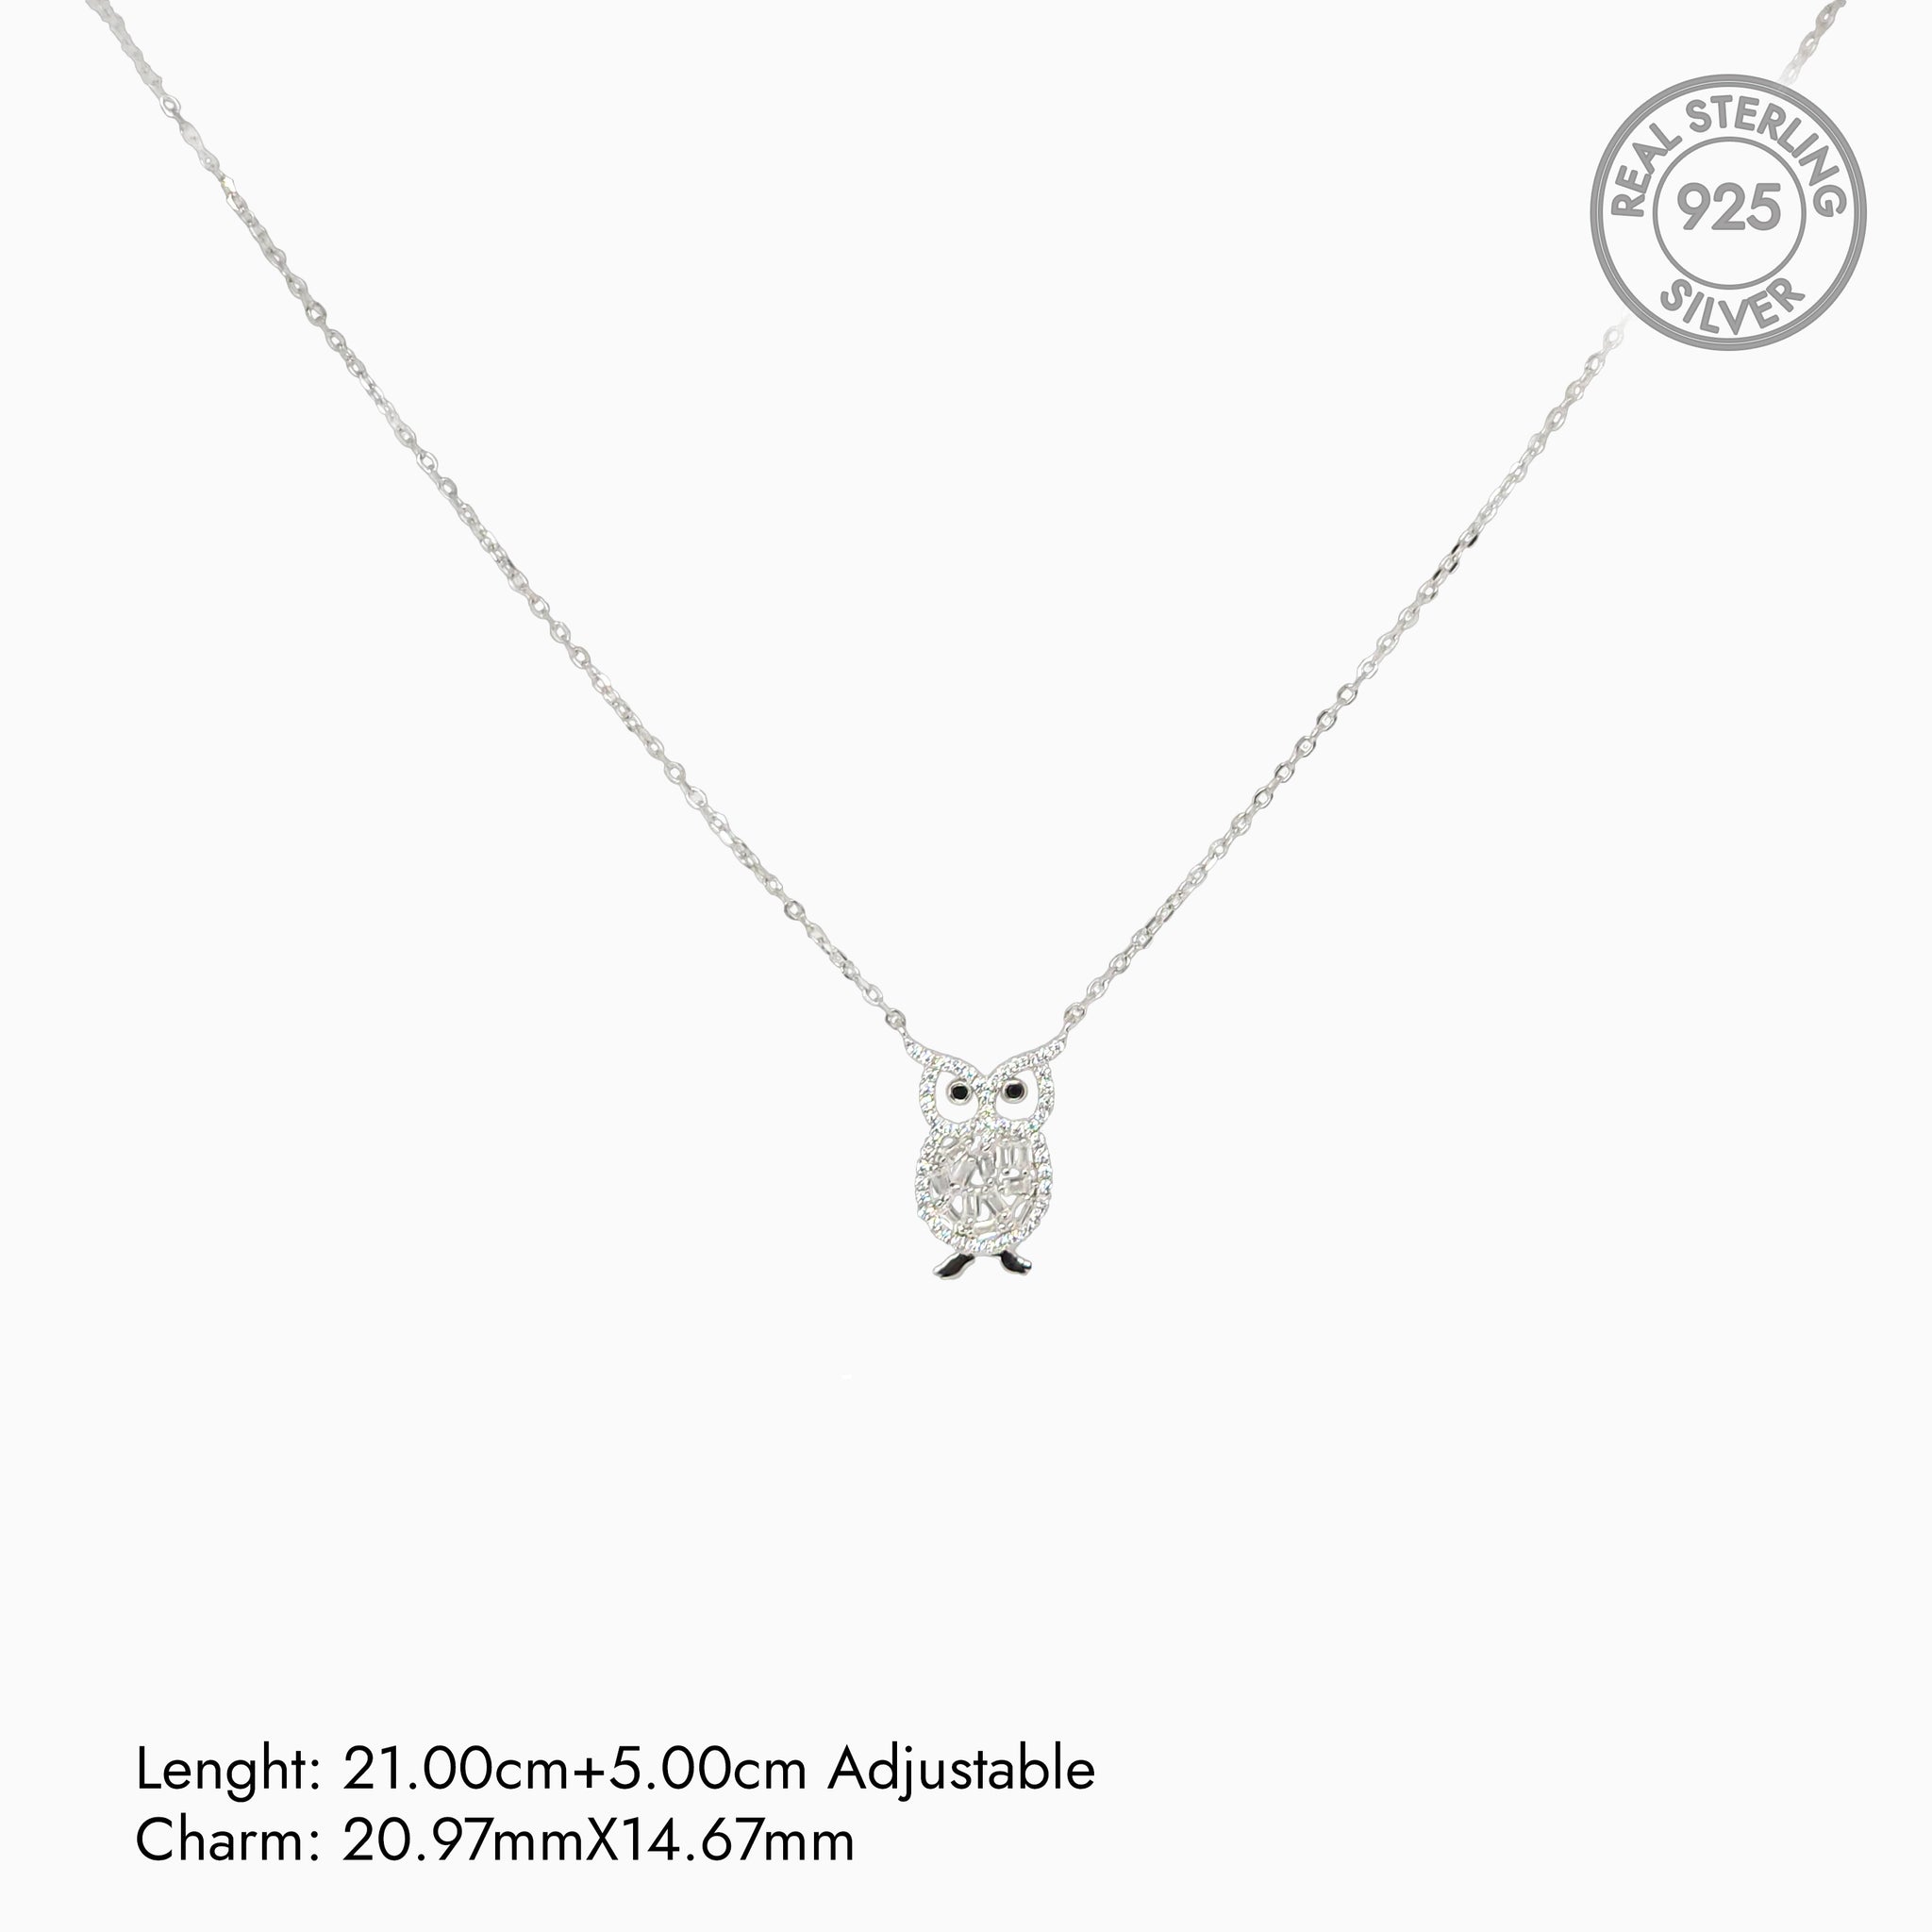 Silver Classic Owl Necklace